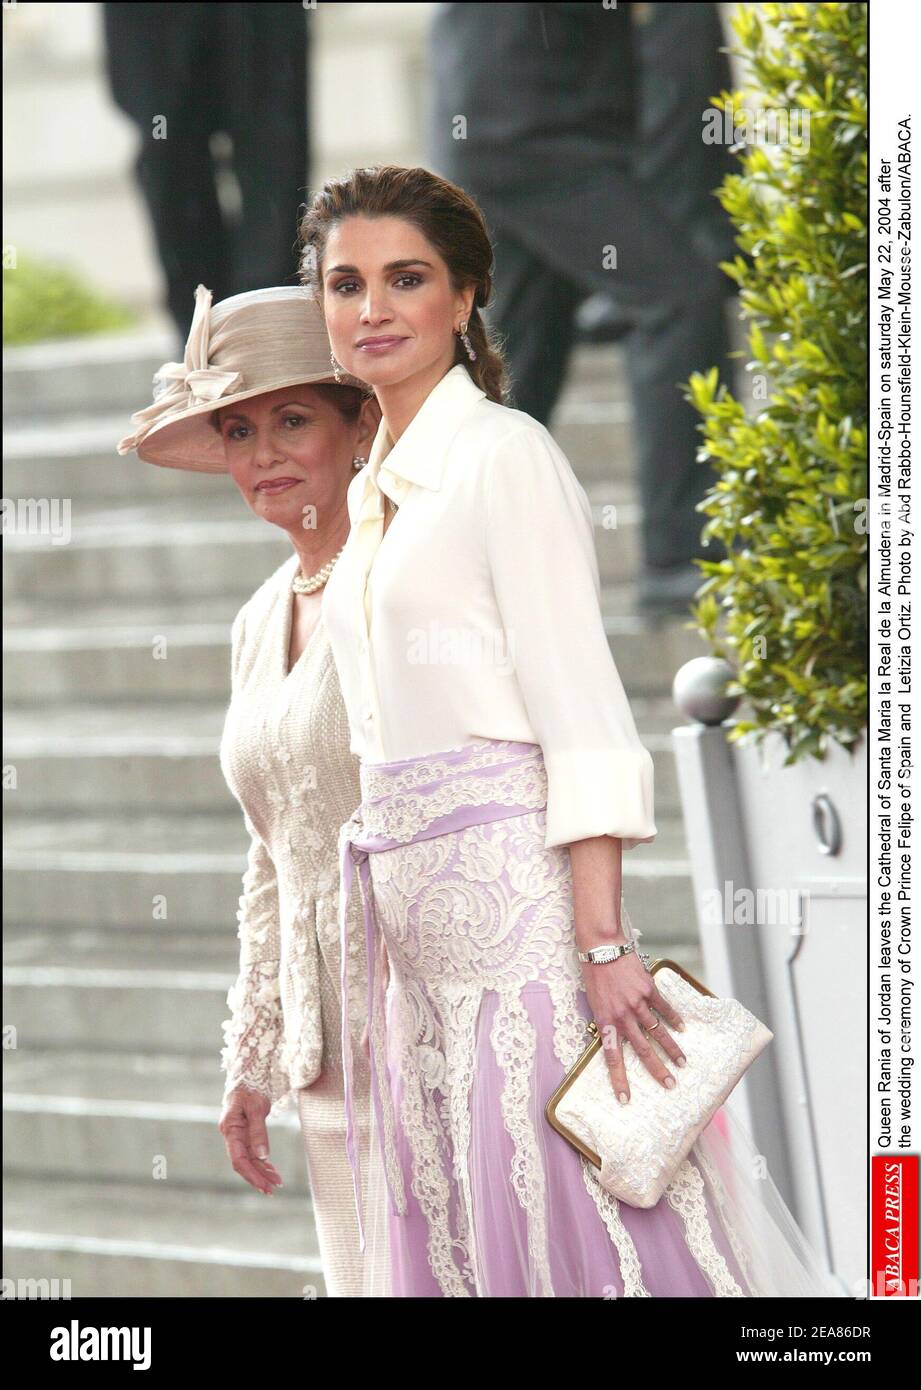 Queen Rania of Jordan leaves the Cathedral of Santa Maria la Real de la Almudena in Madrid-Spain on saturday May 22, 2004 after the wedding ceremony of Crown Prince Felipe of Spain and Letizia Ortiz. Photo by Abd Rabbo-Hounsfield-Klein-Mousse-Zabulon/ABACA. Stock Photo